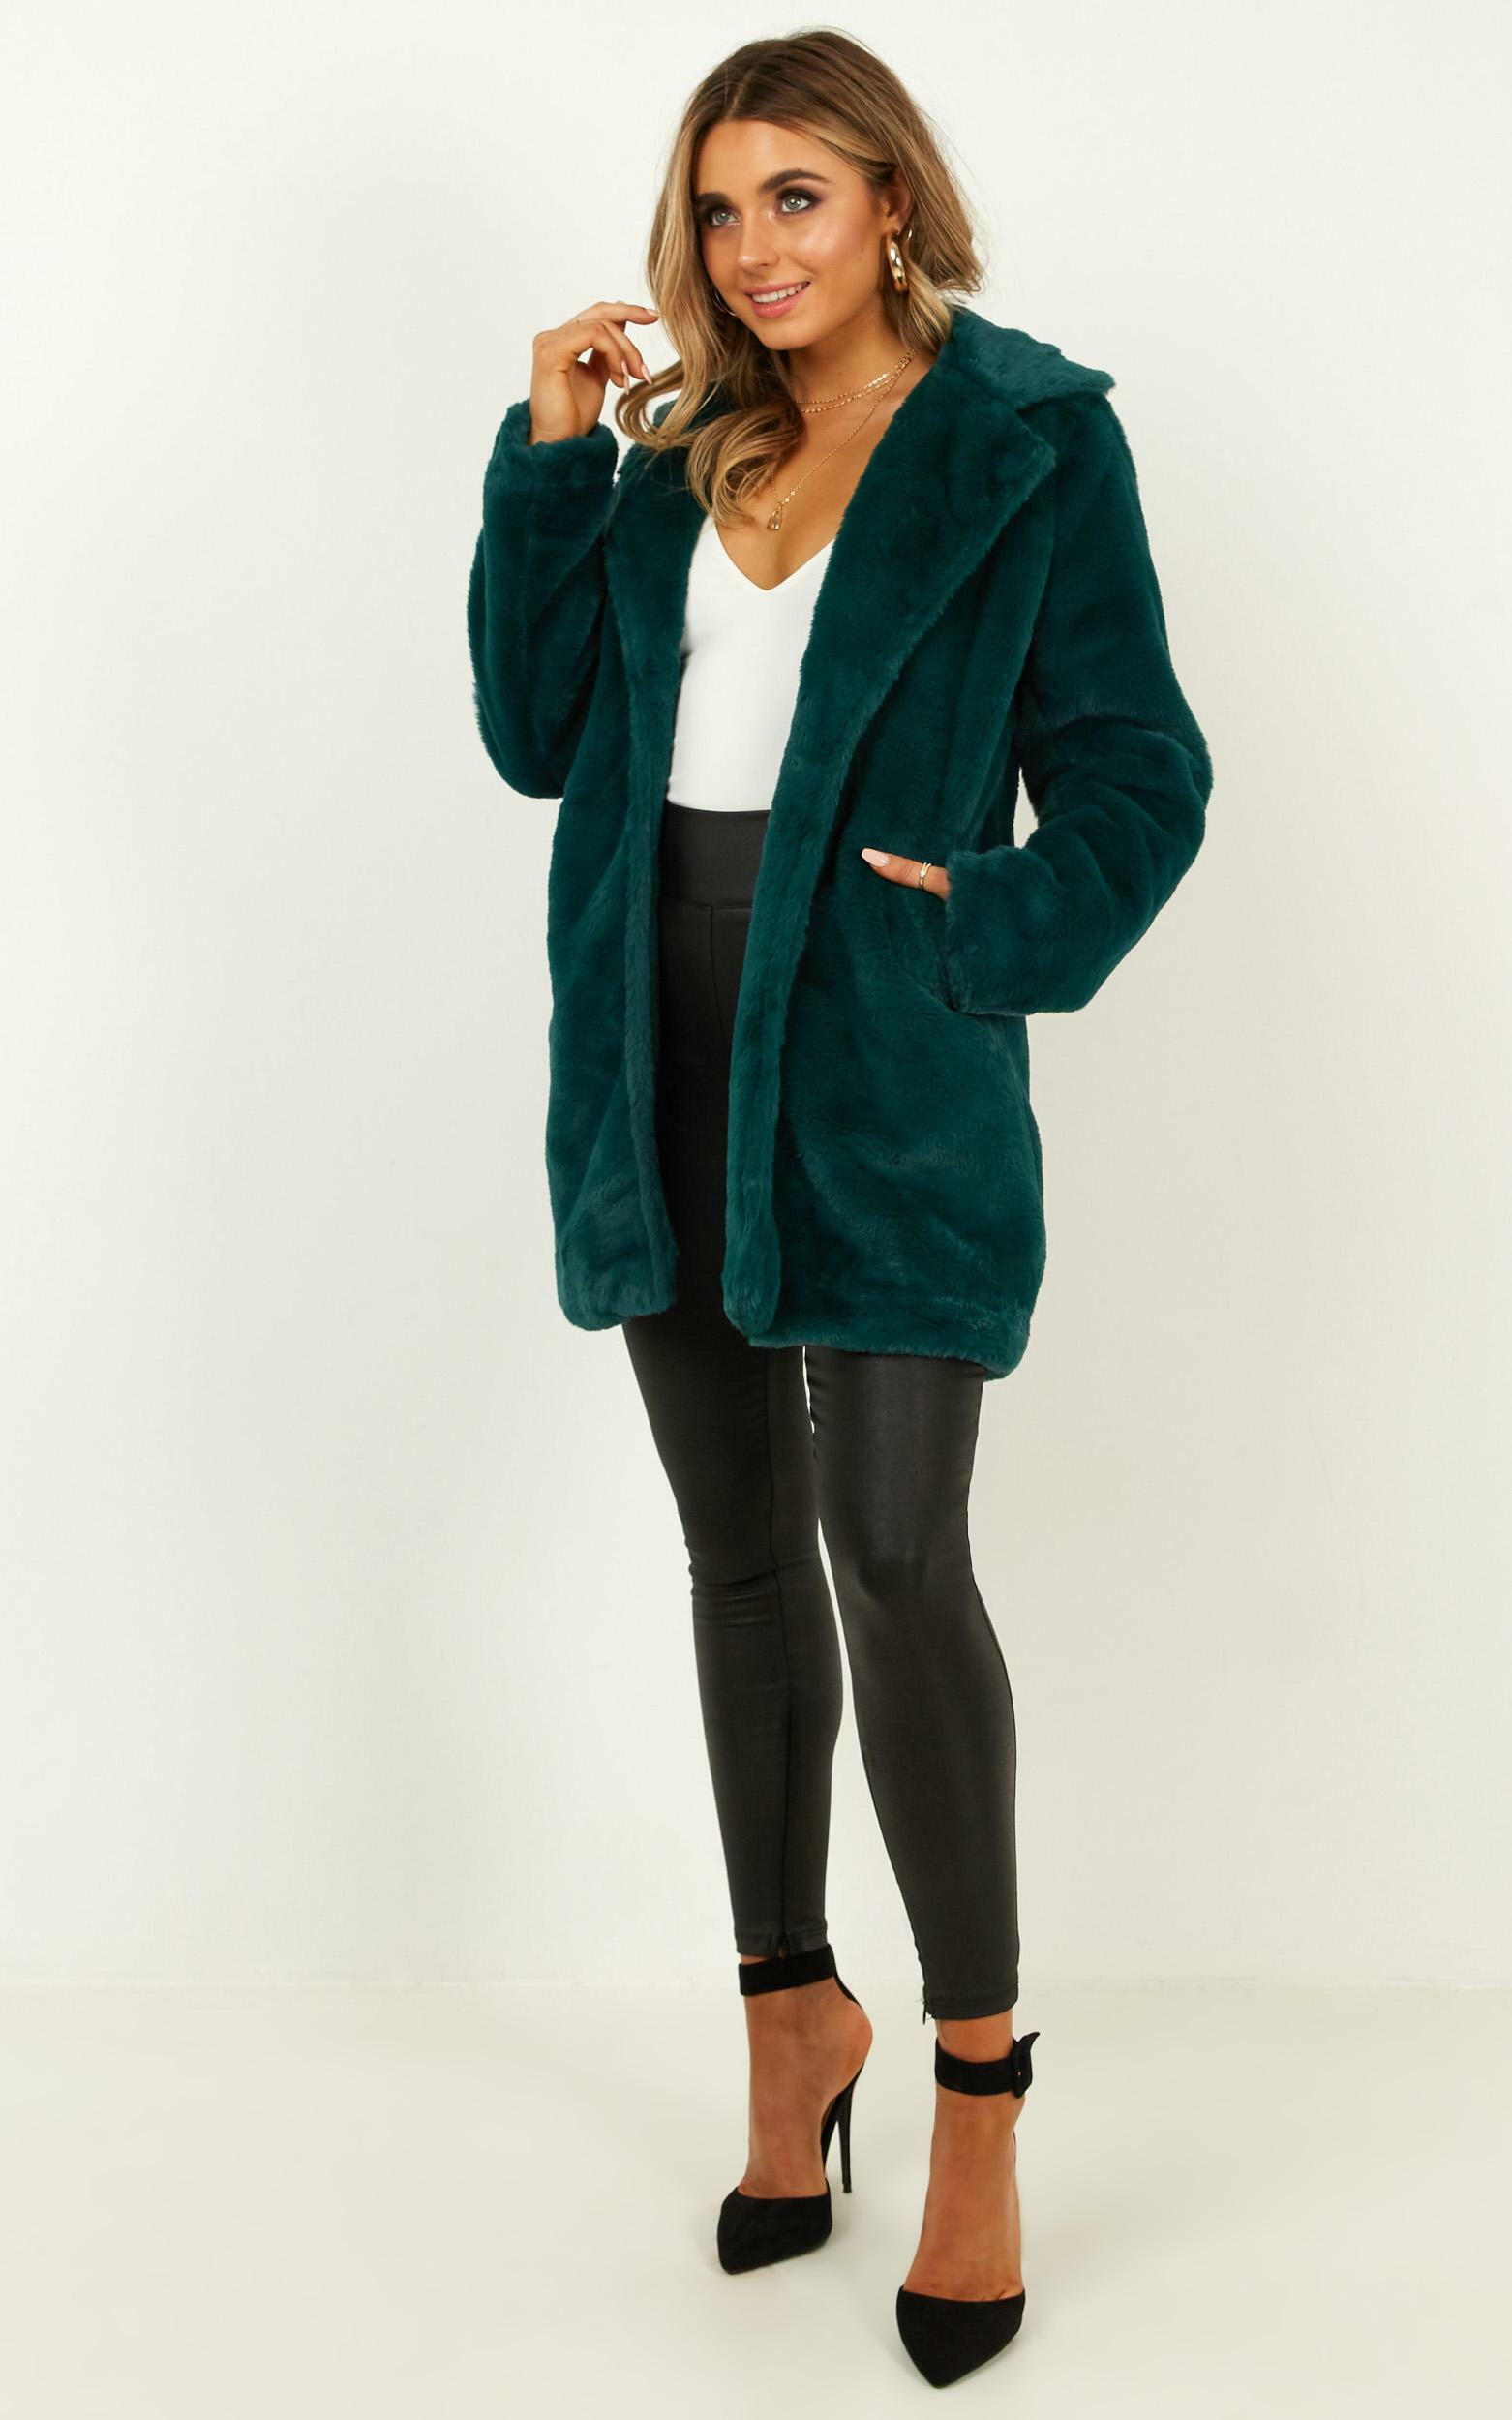 Leaning On You Coat in Emerald faux fur - 12, GRN2, hi-res image number null